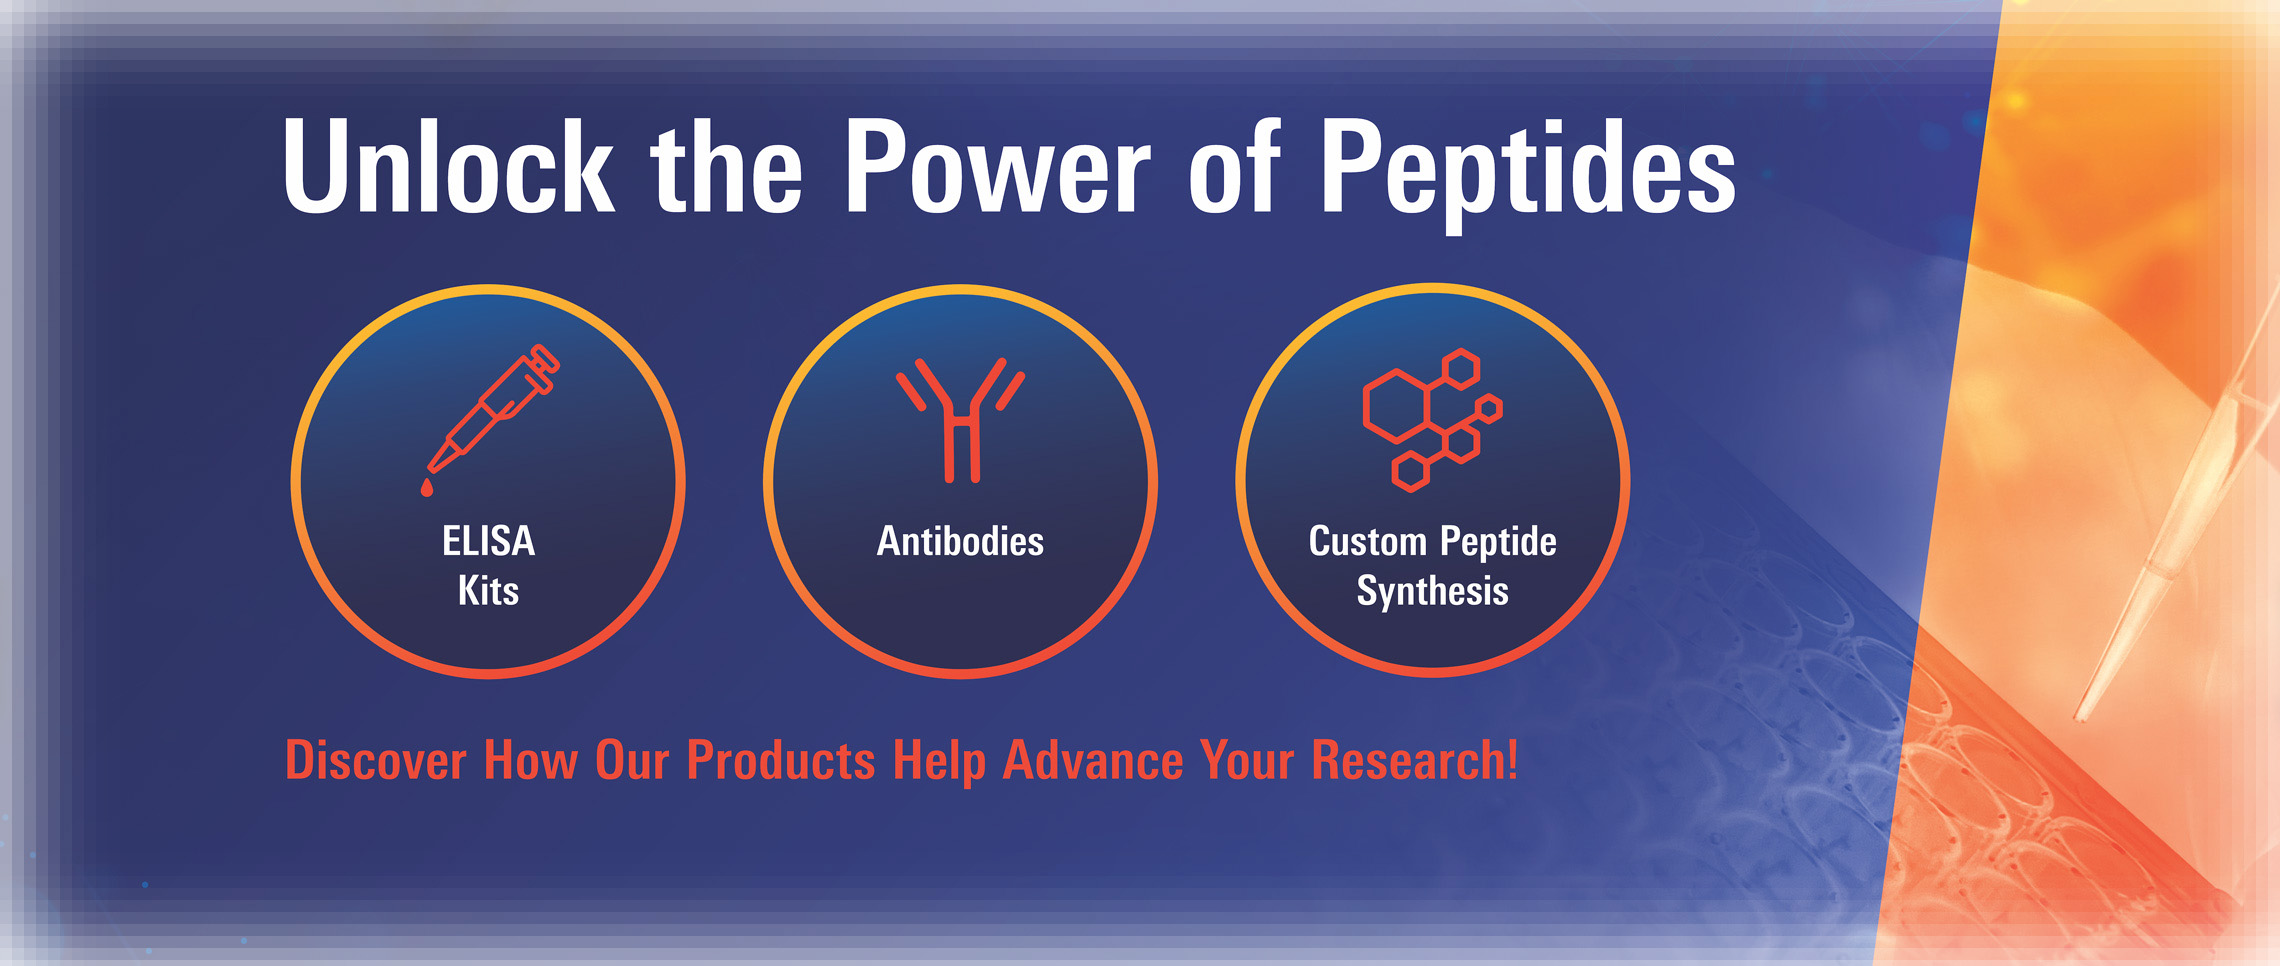 Unlock the Power of Peptides